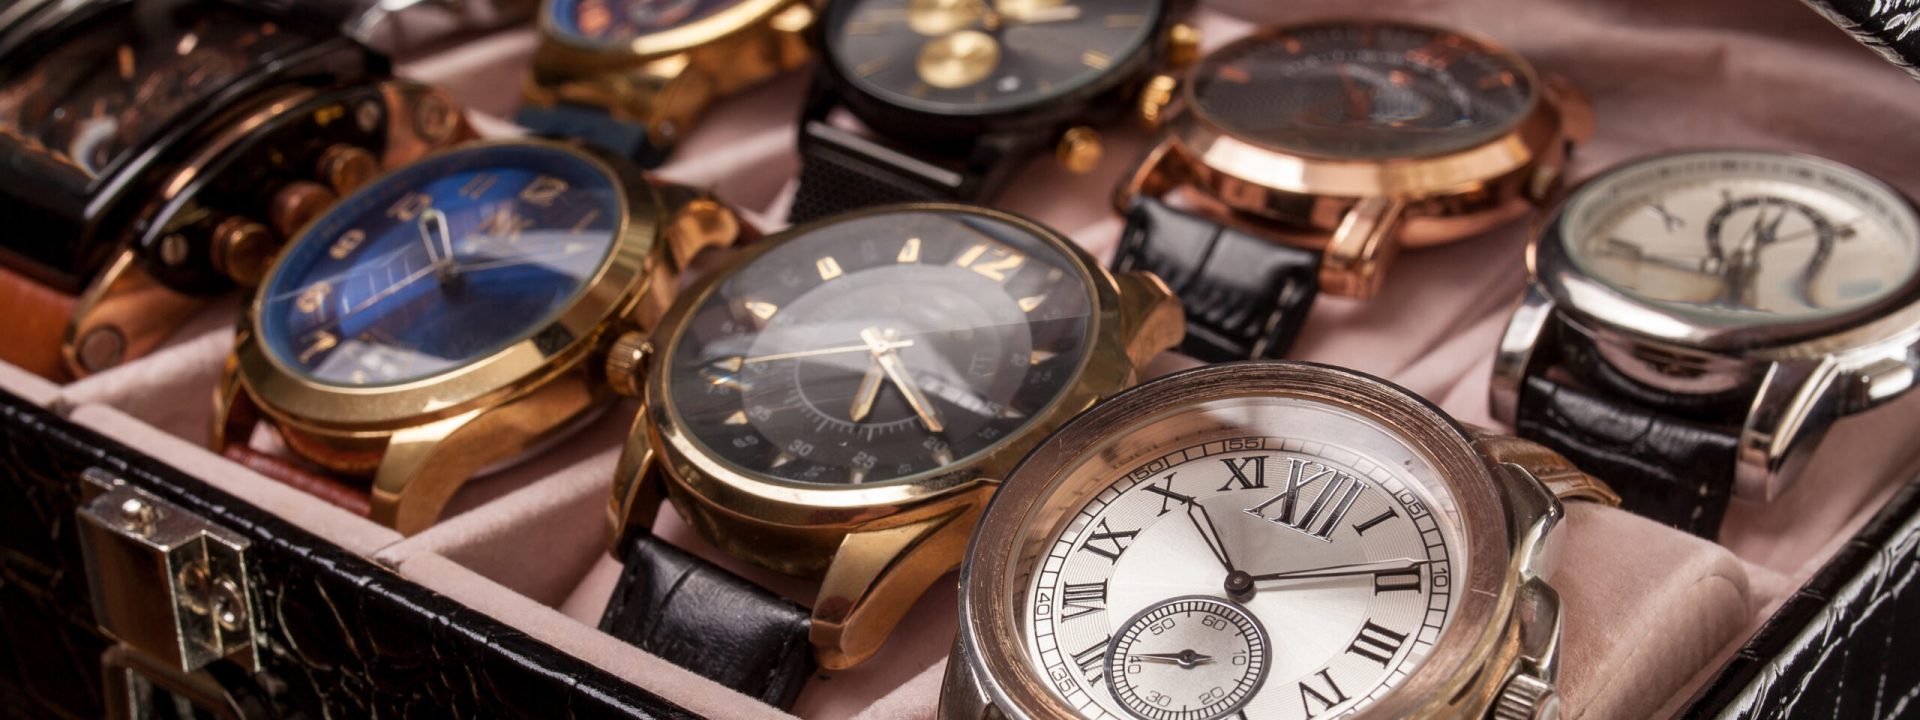 Watch Box of Luxury Watches